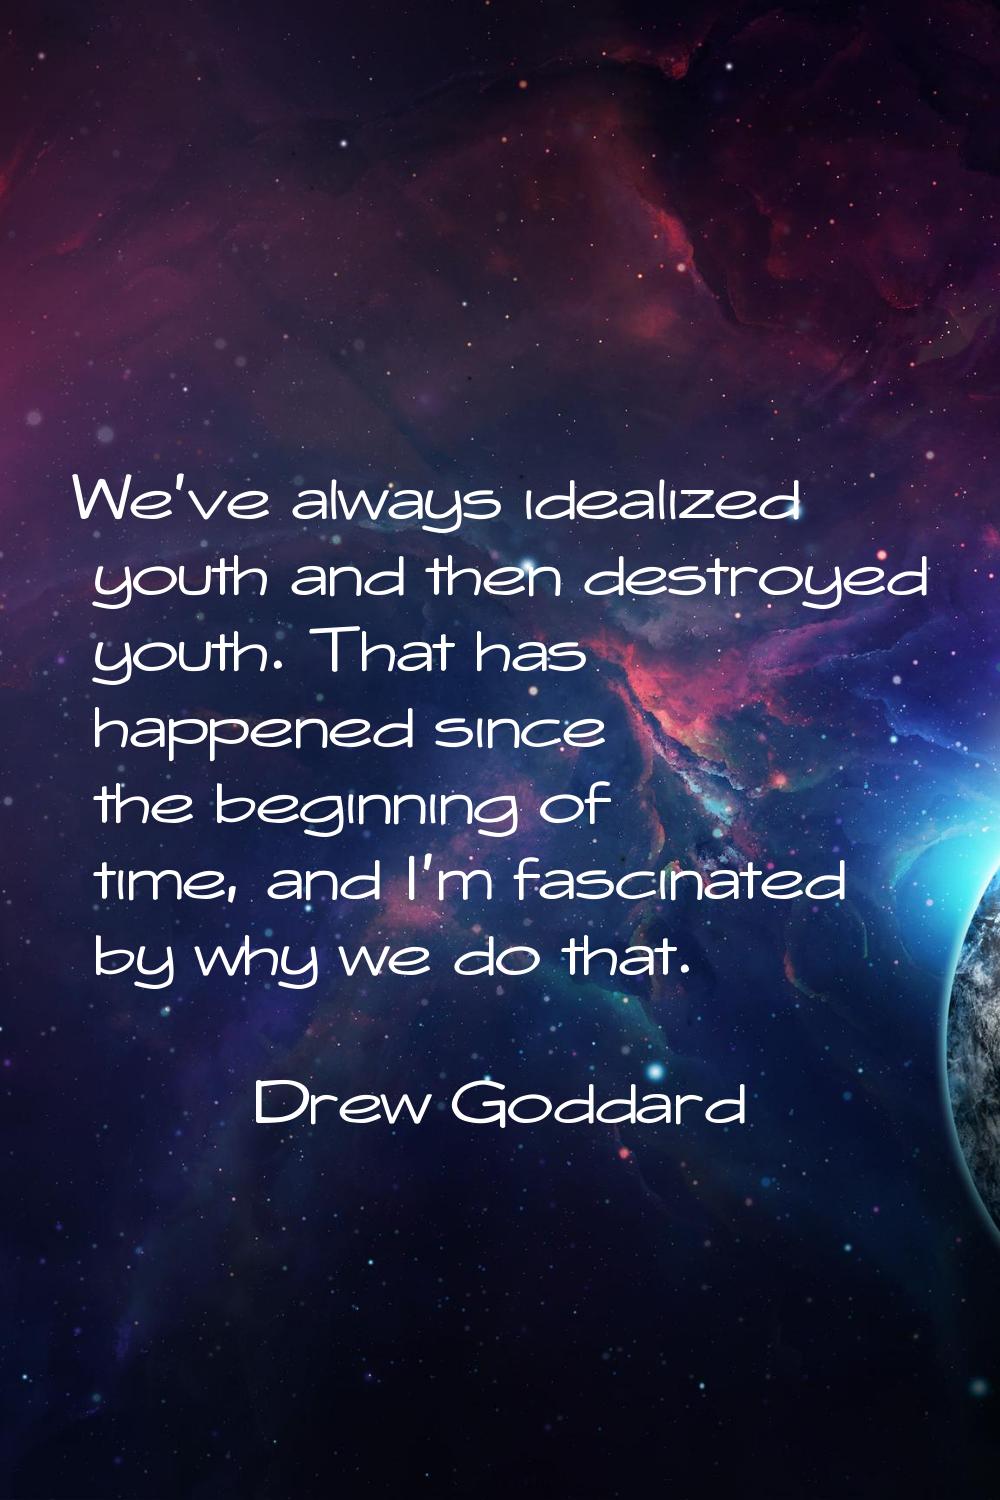 We've always idealized youth and then destroyed youth. That has happened since the beginning of tim